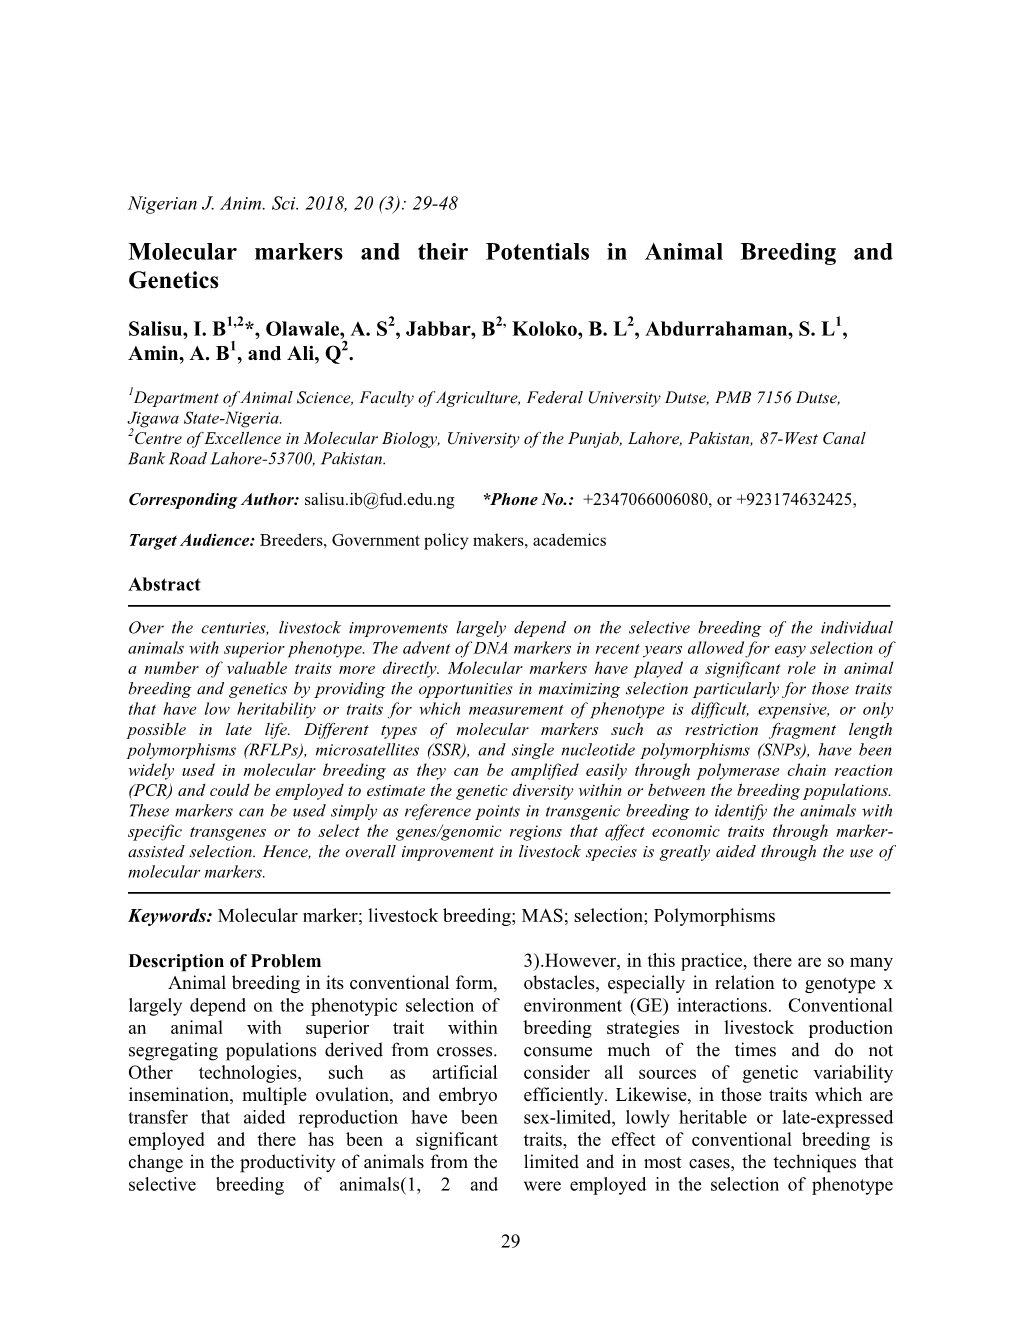 Molecular Markers and Their Potentials in Animal Breeding and Genetics